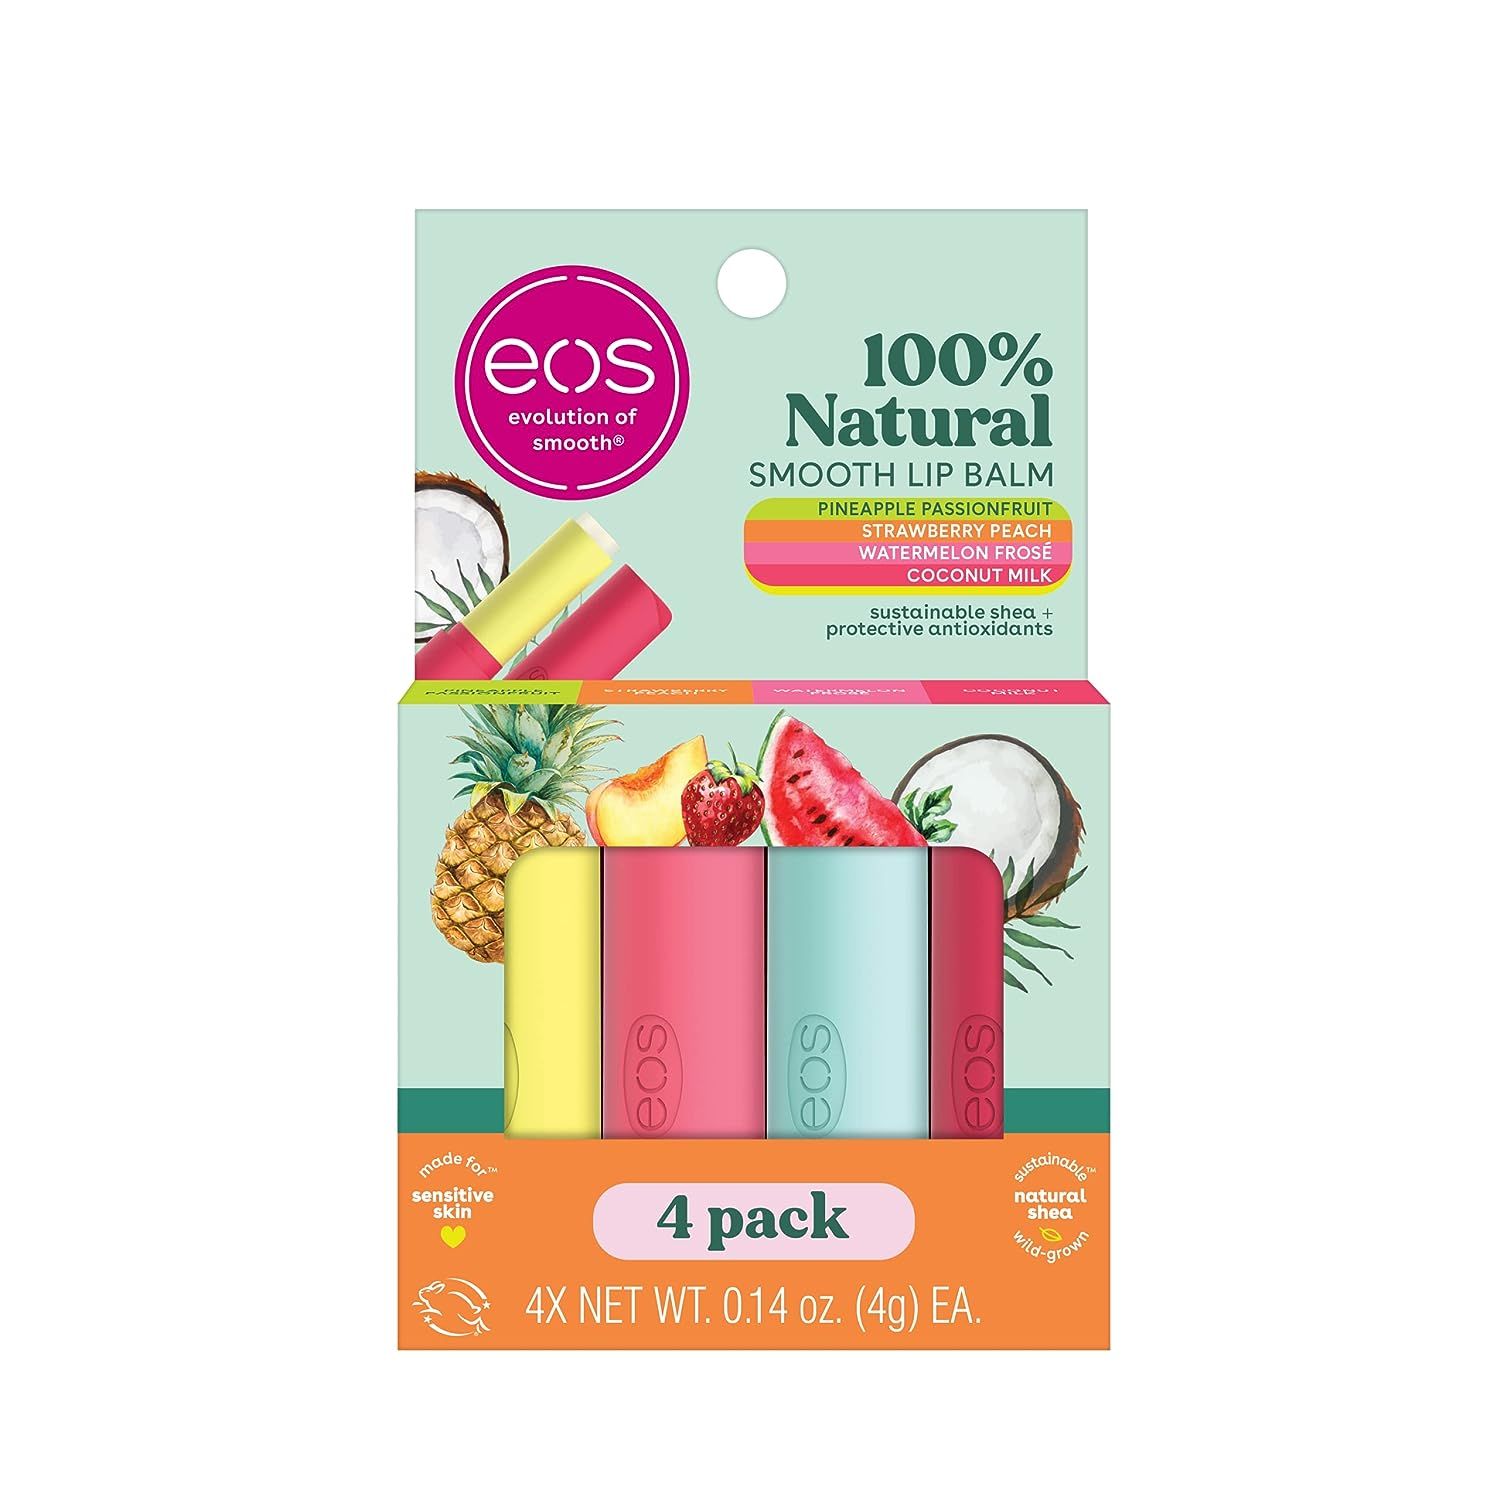 eos 100% Natural Variety Pack Lip Balm Sticks, Coconut Milk, Watermelon Frose, Pineapple Passionf... | Amazon (US)